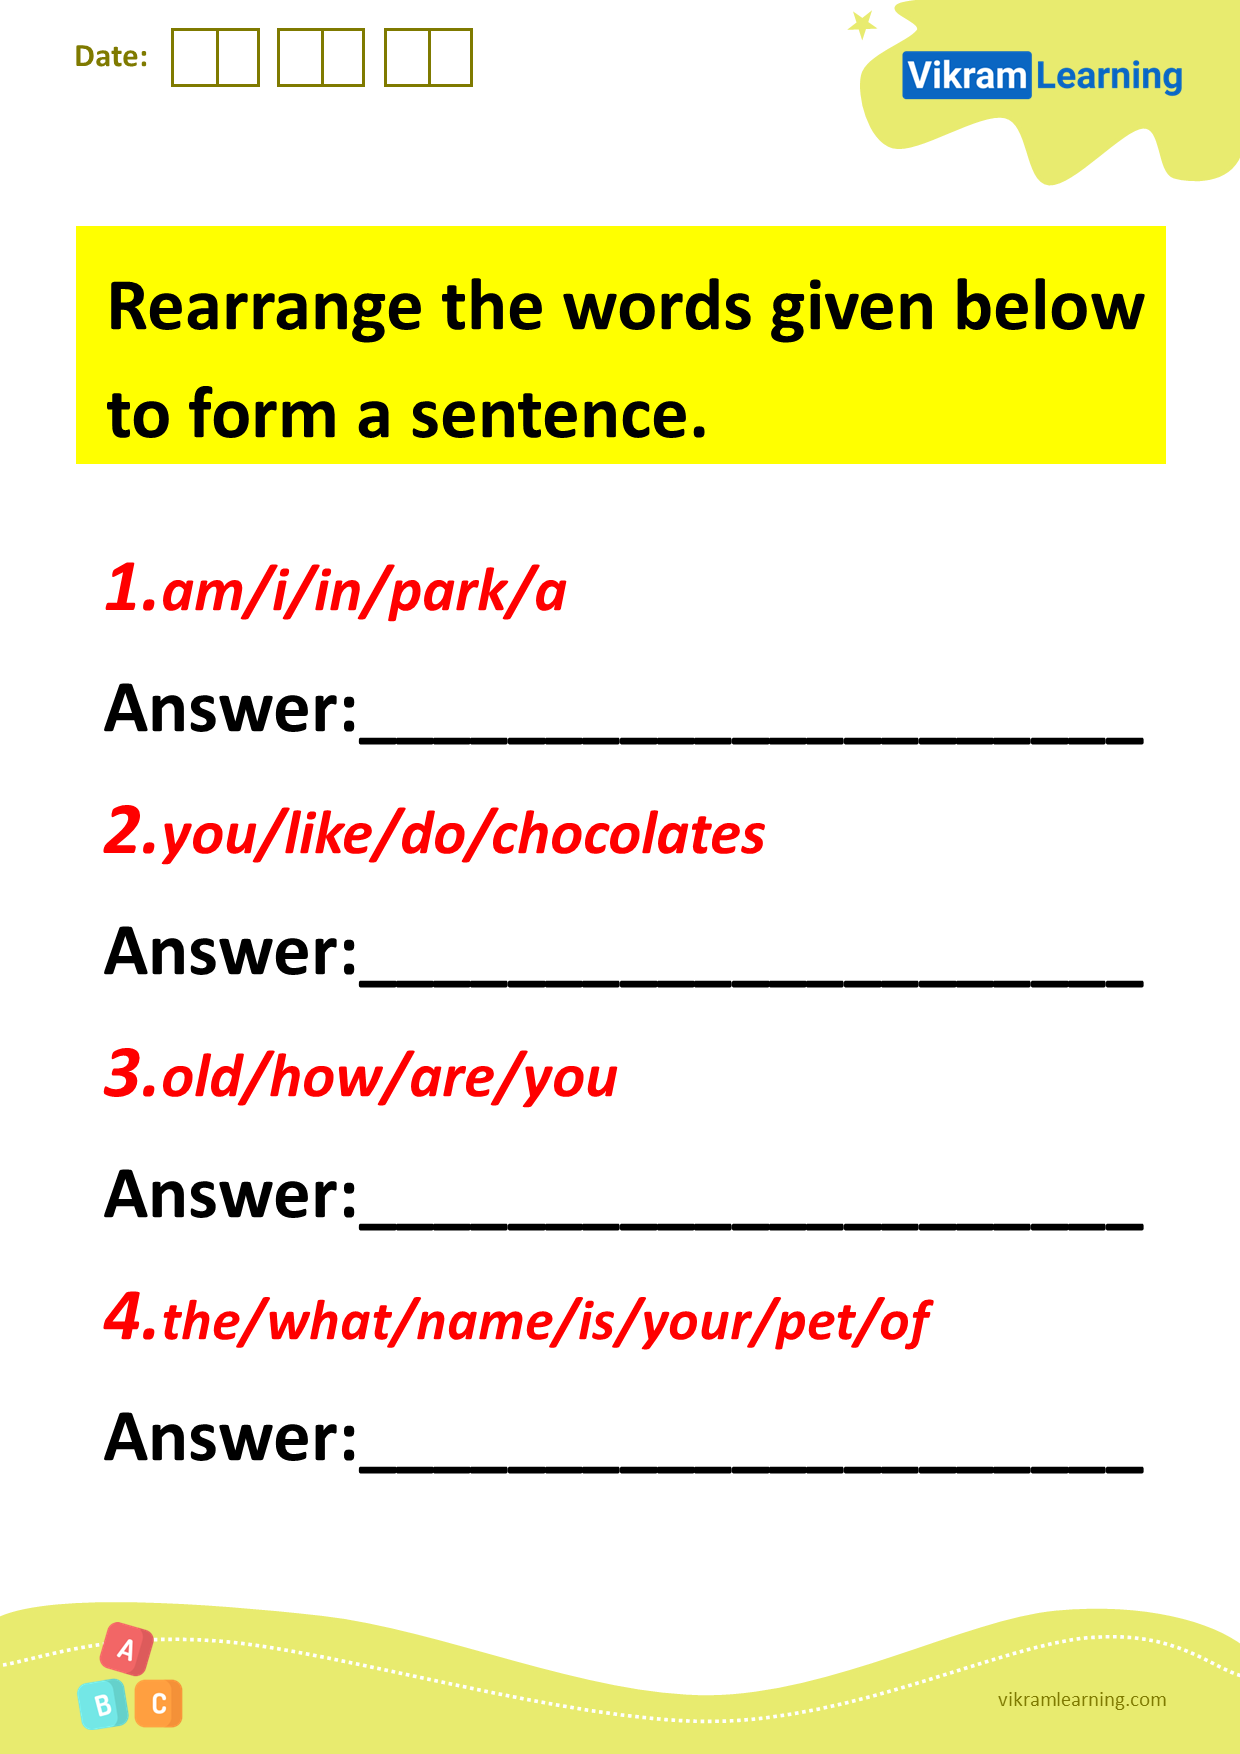 Download rearrange the words given below to form a sentence worksheets